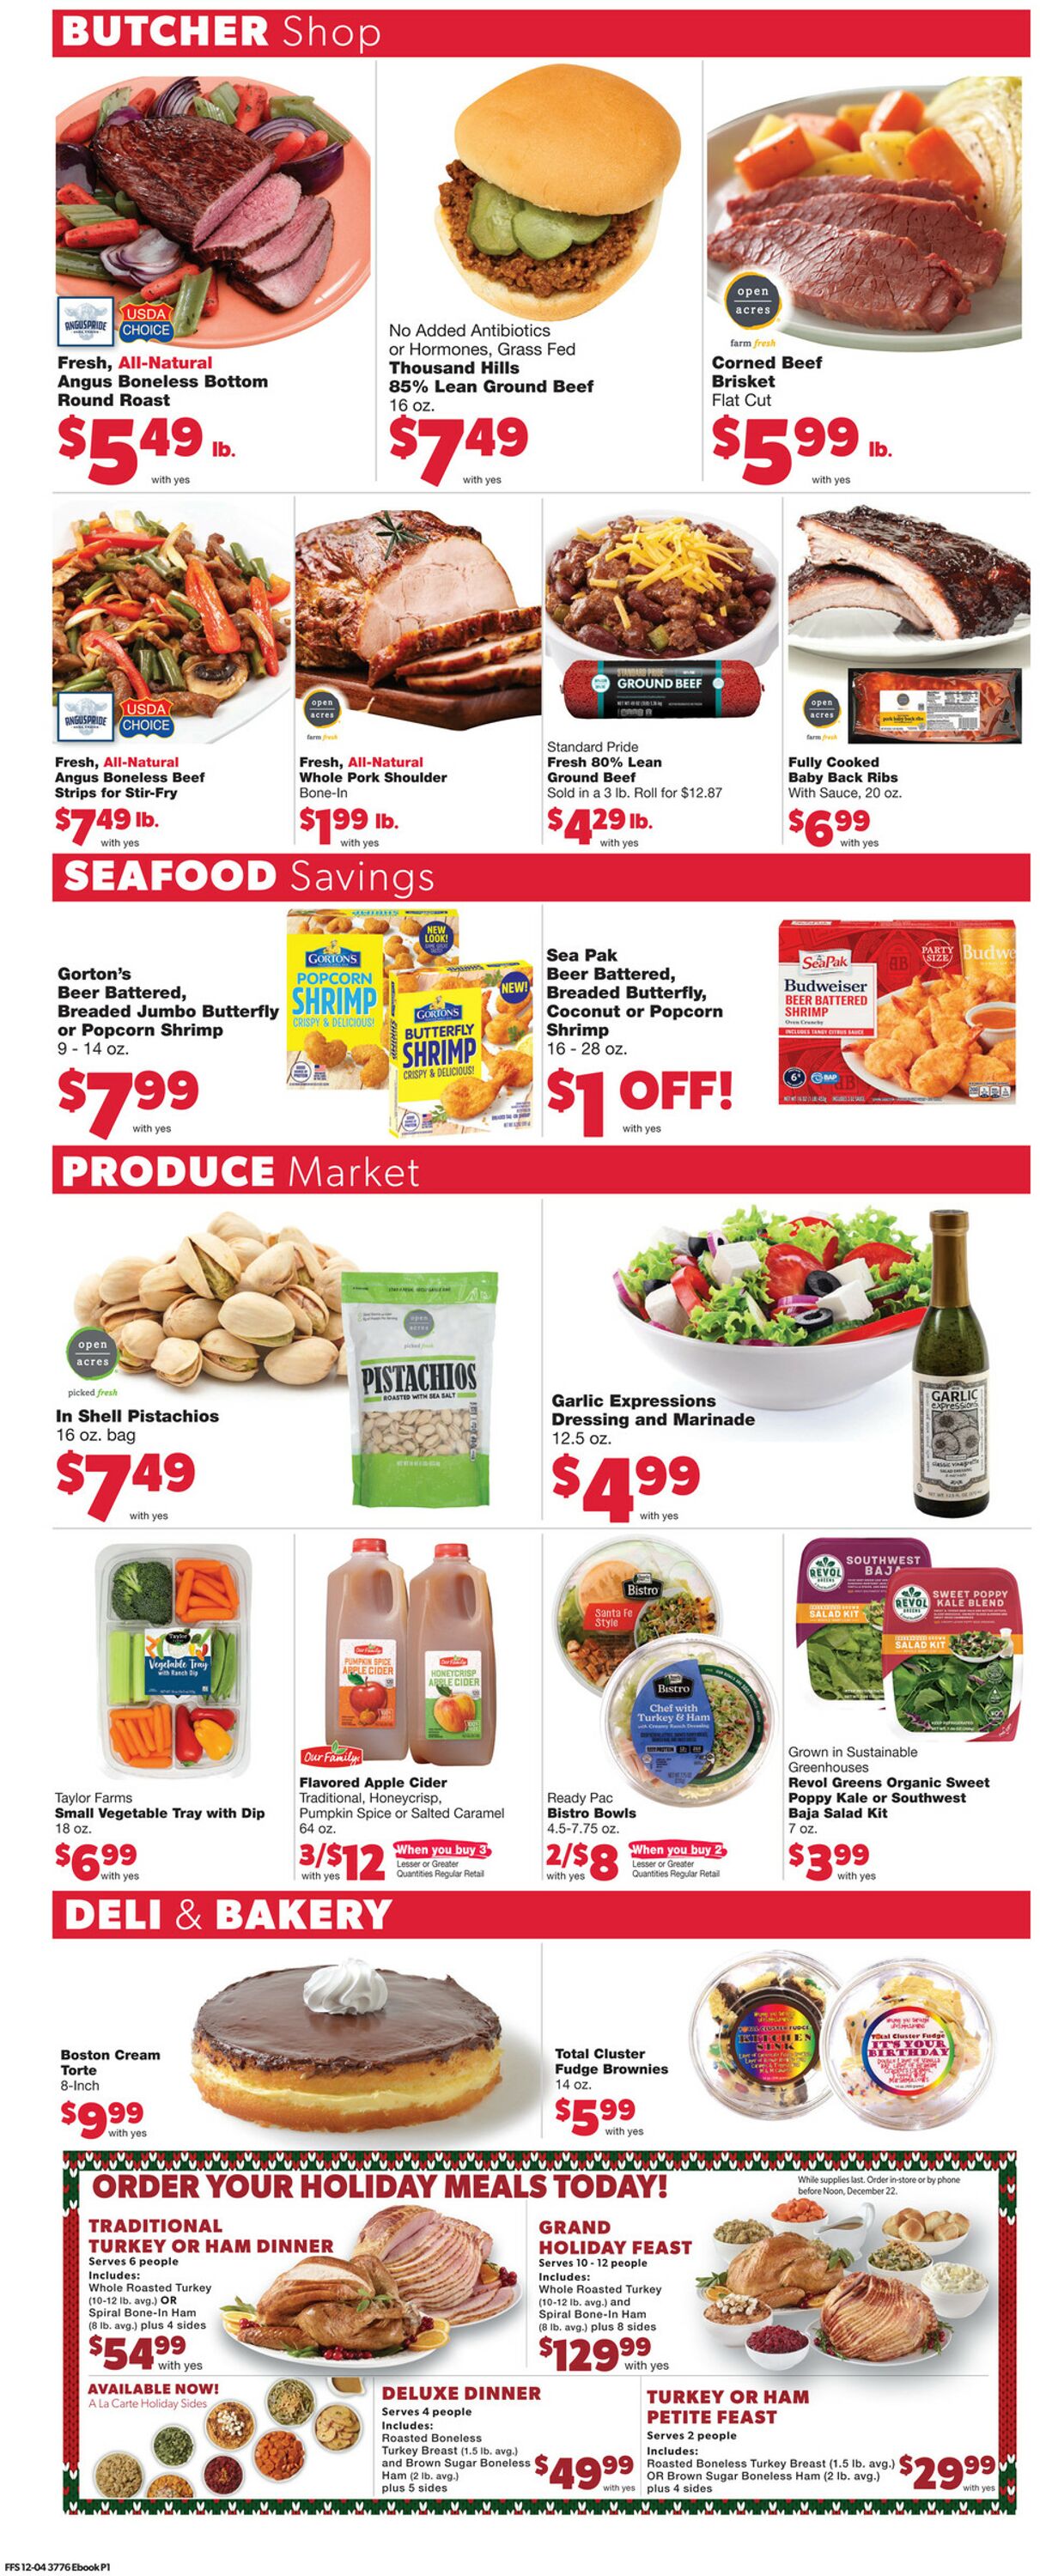 Family Fare Ad from 12/14/2022